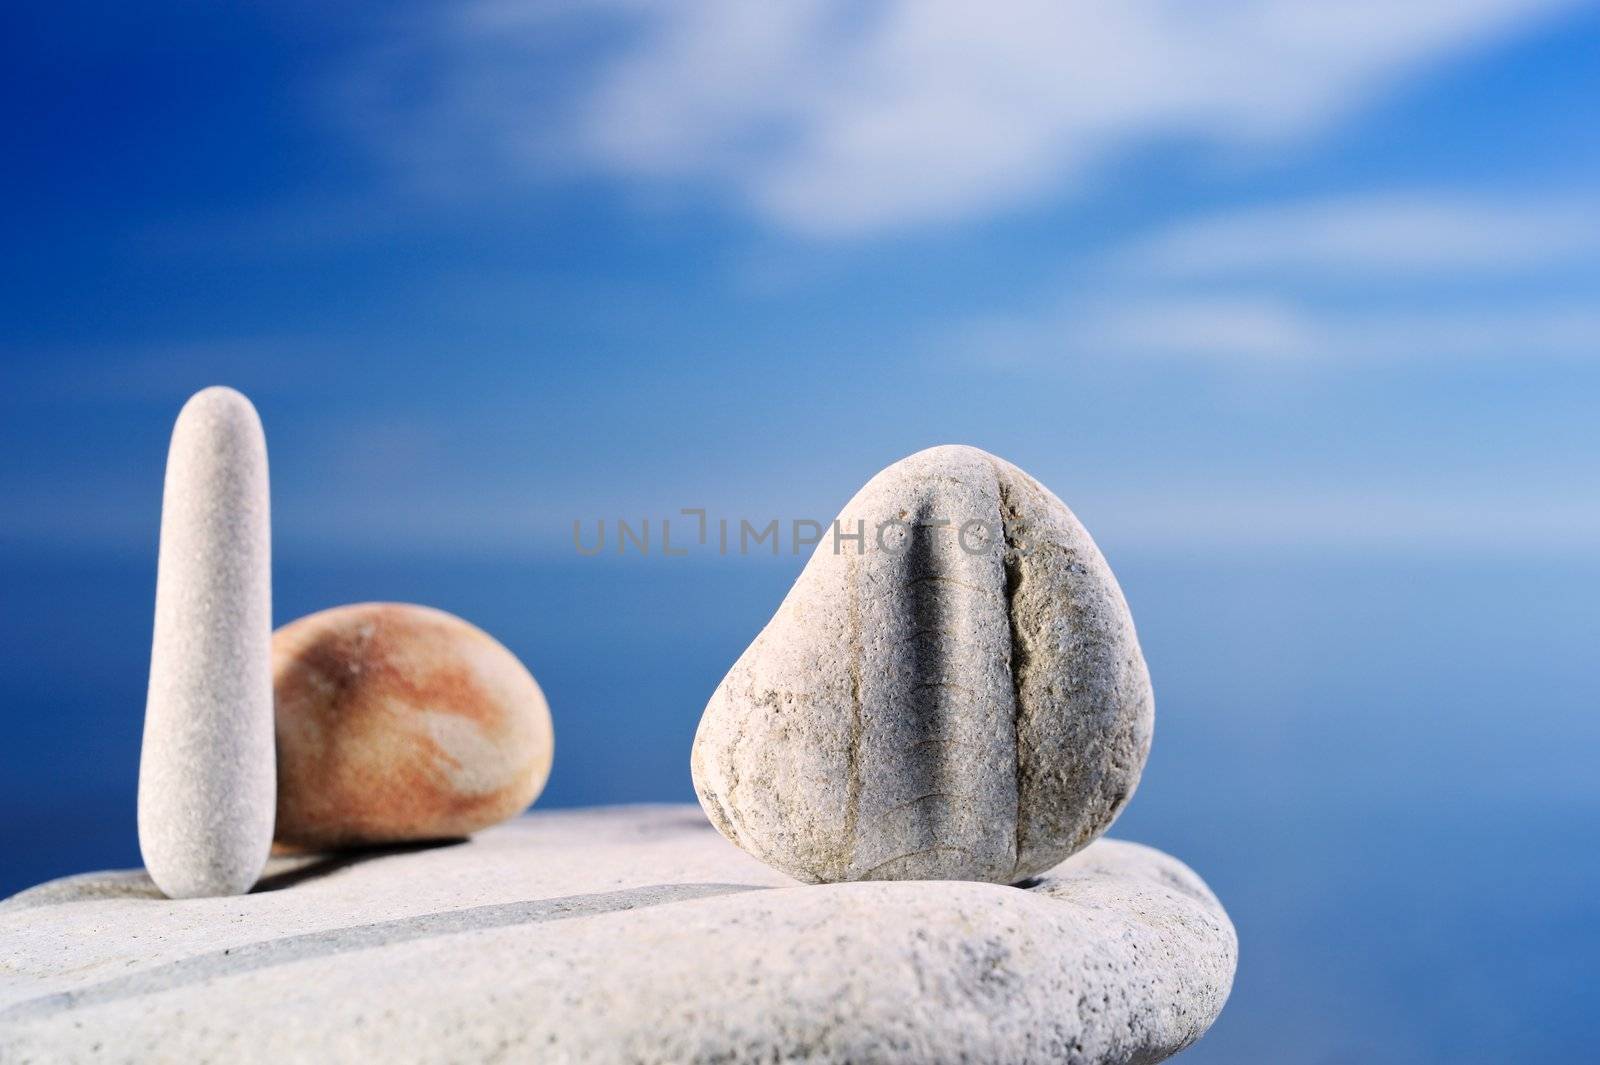 Pebble against the blue sky by styf22